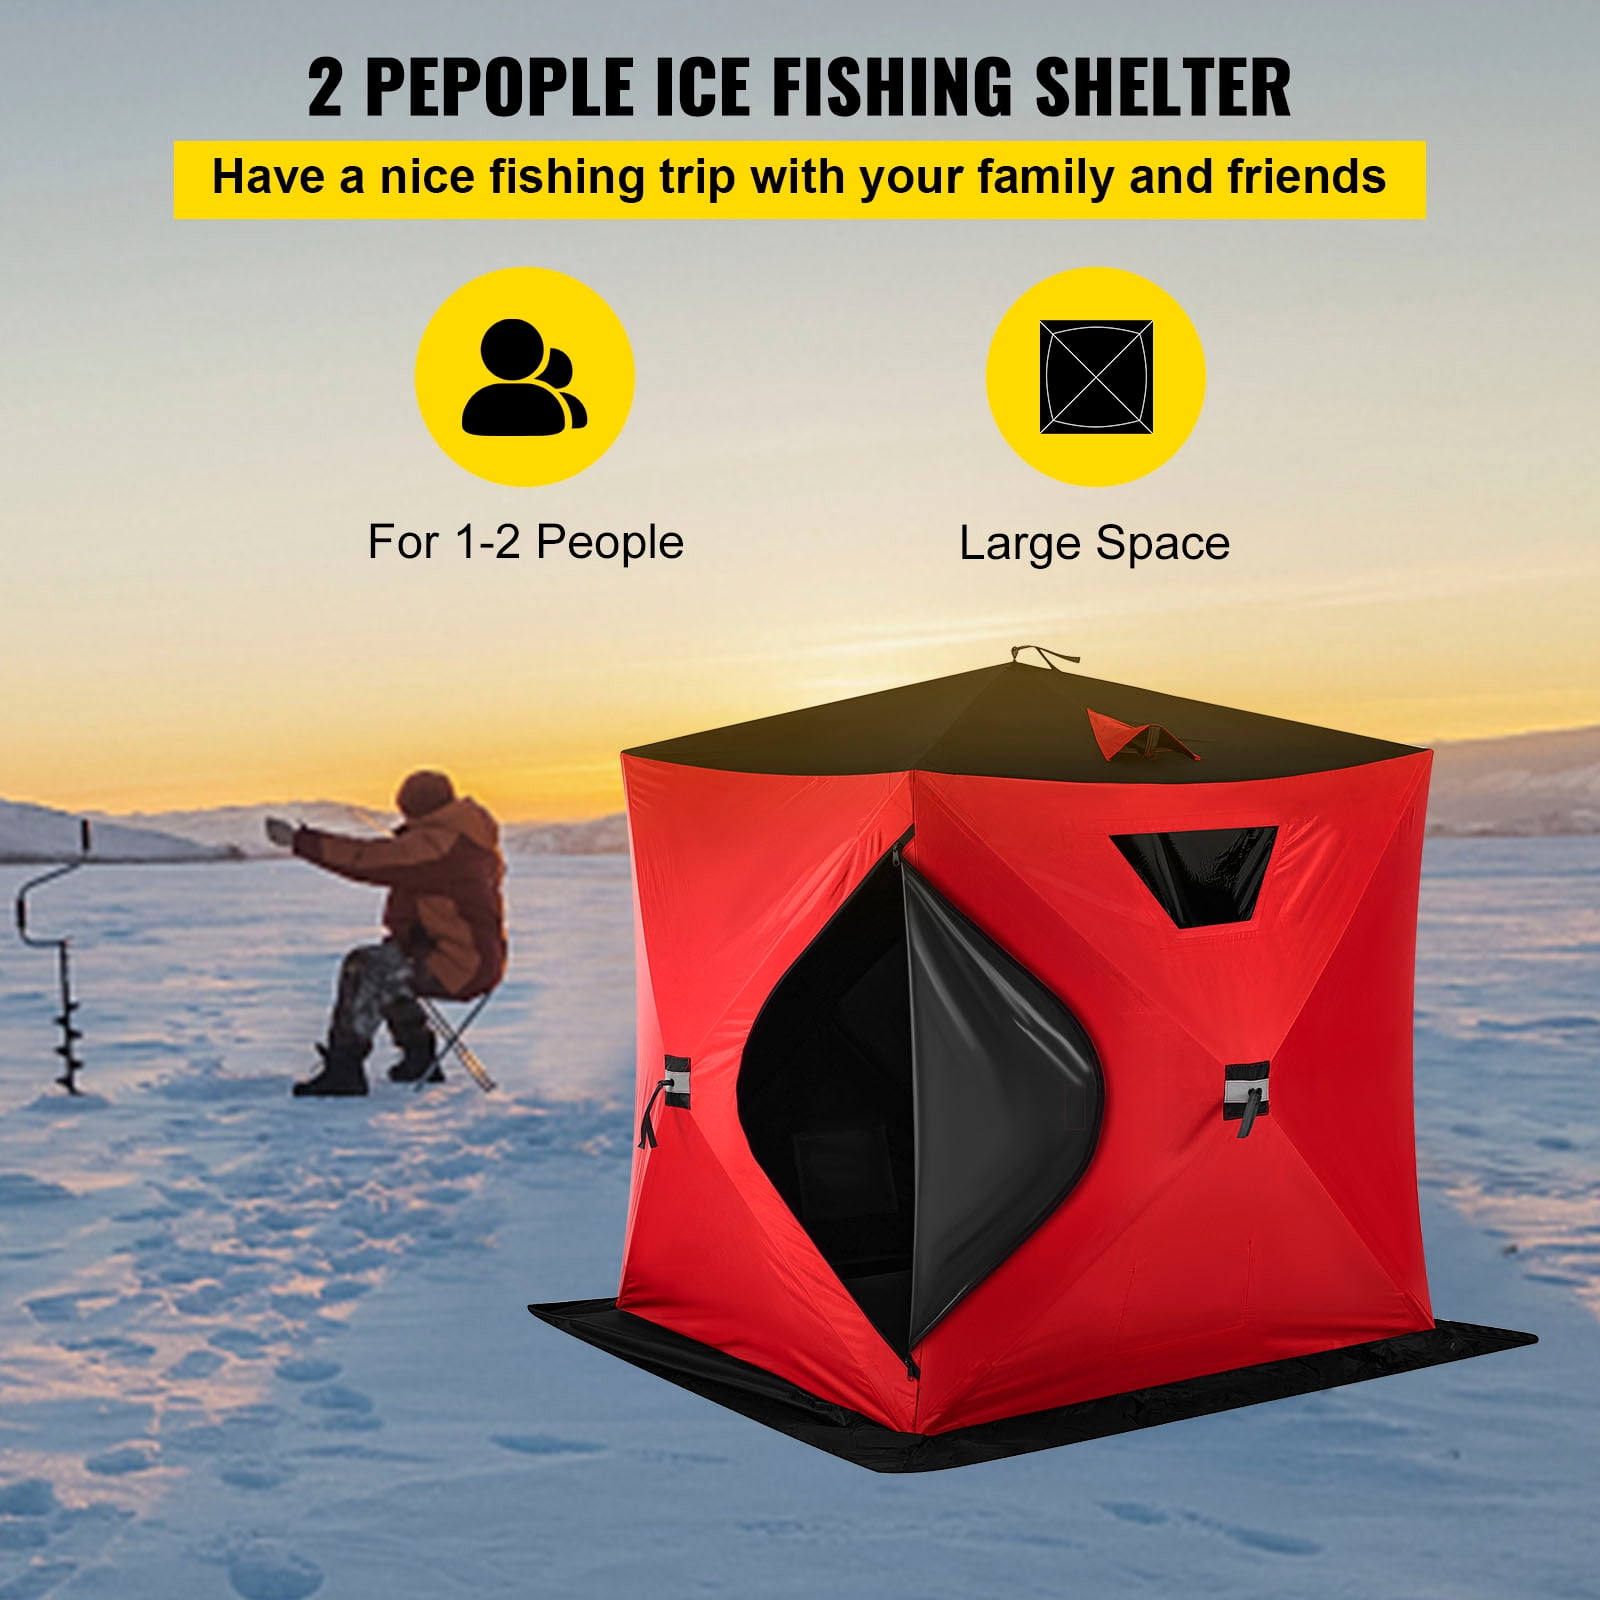 Portable Ice Shelter Tent House Carrying Bag Fishing Pop-up Fabric 2 Person 